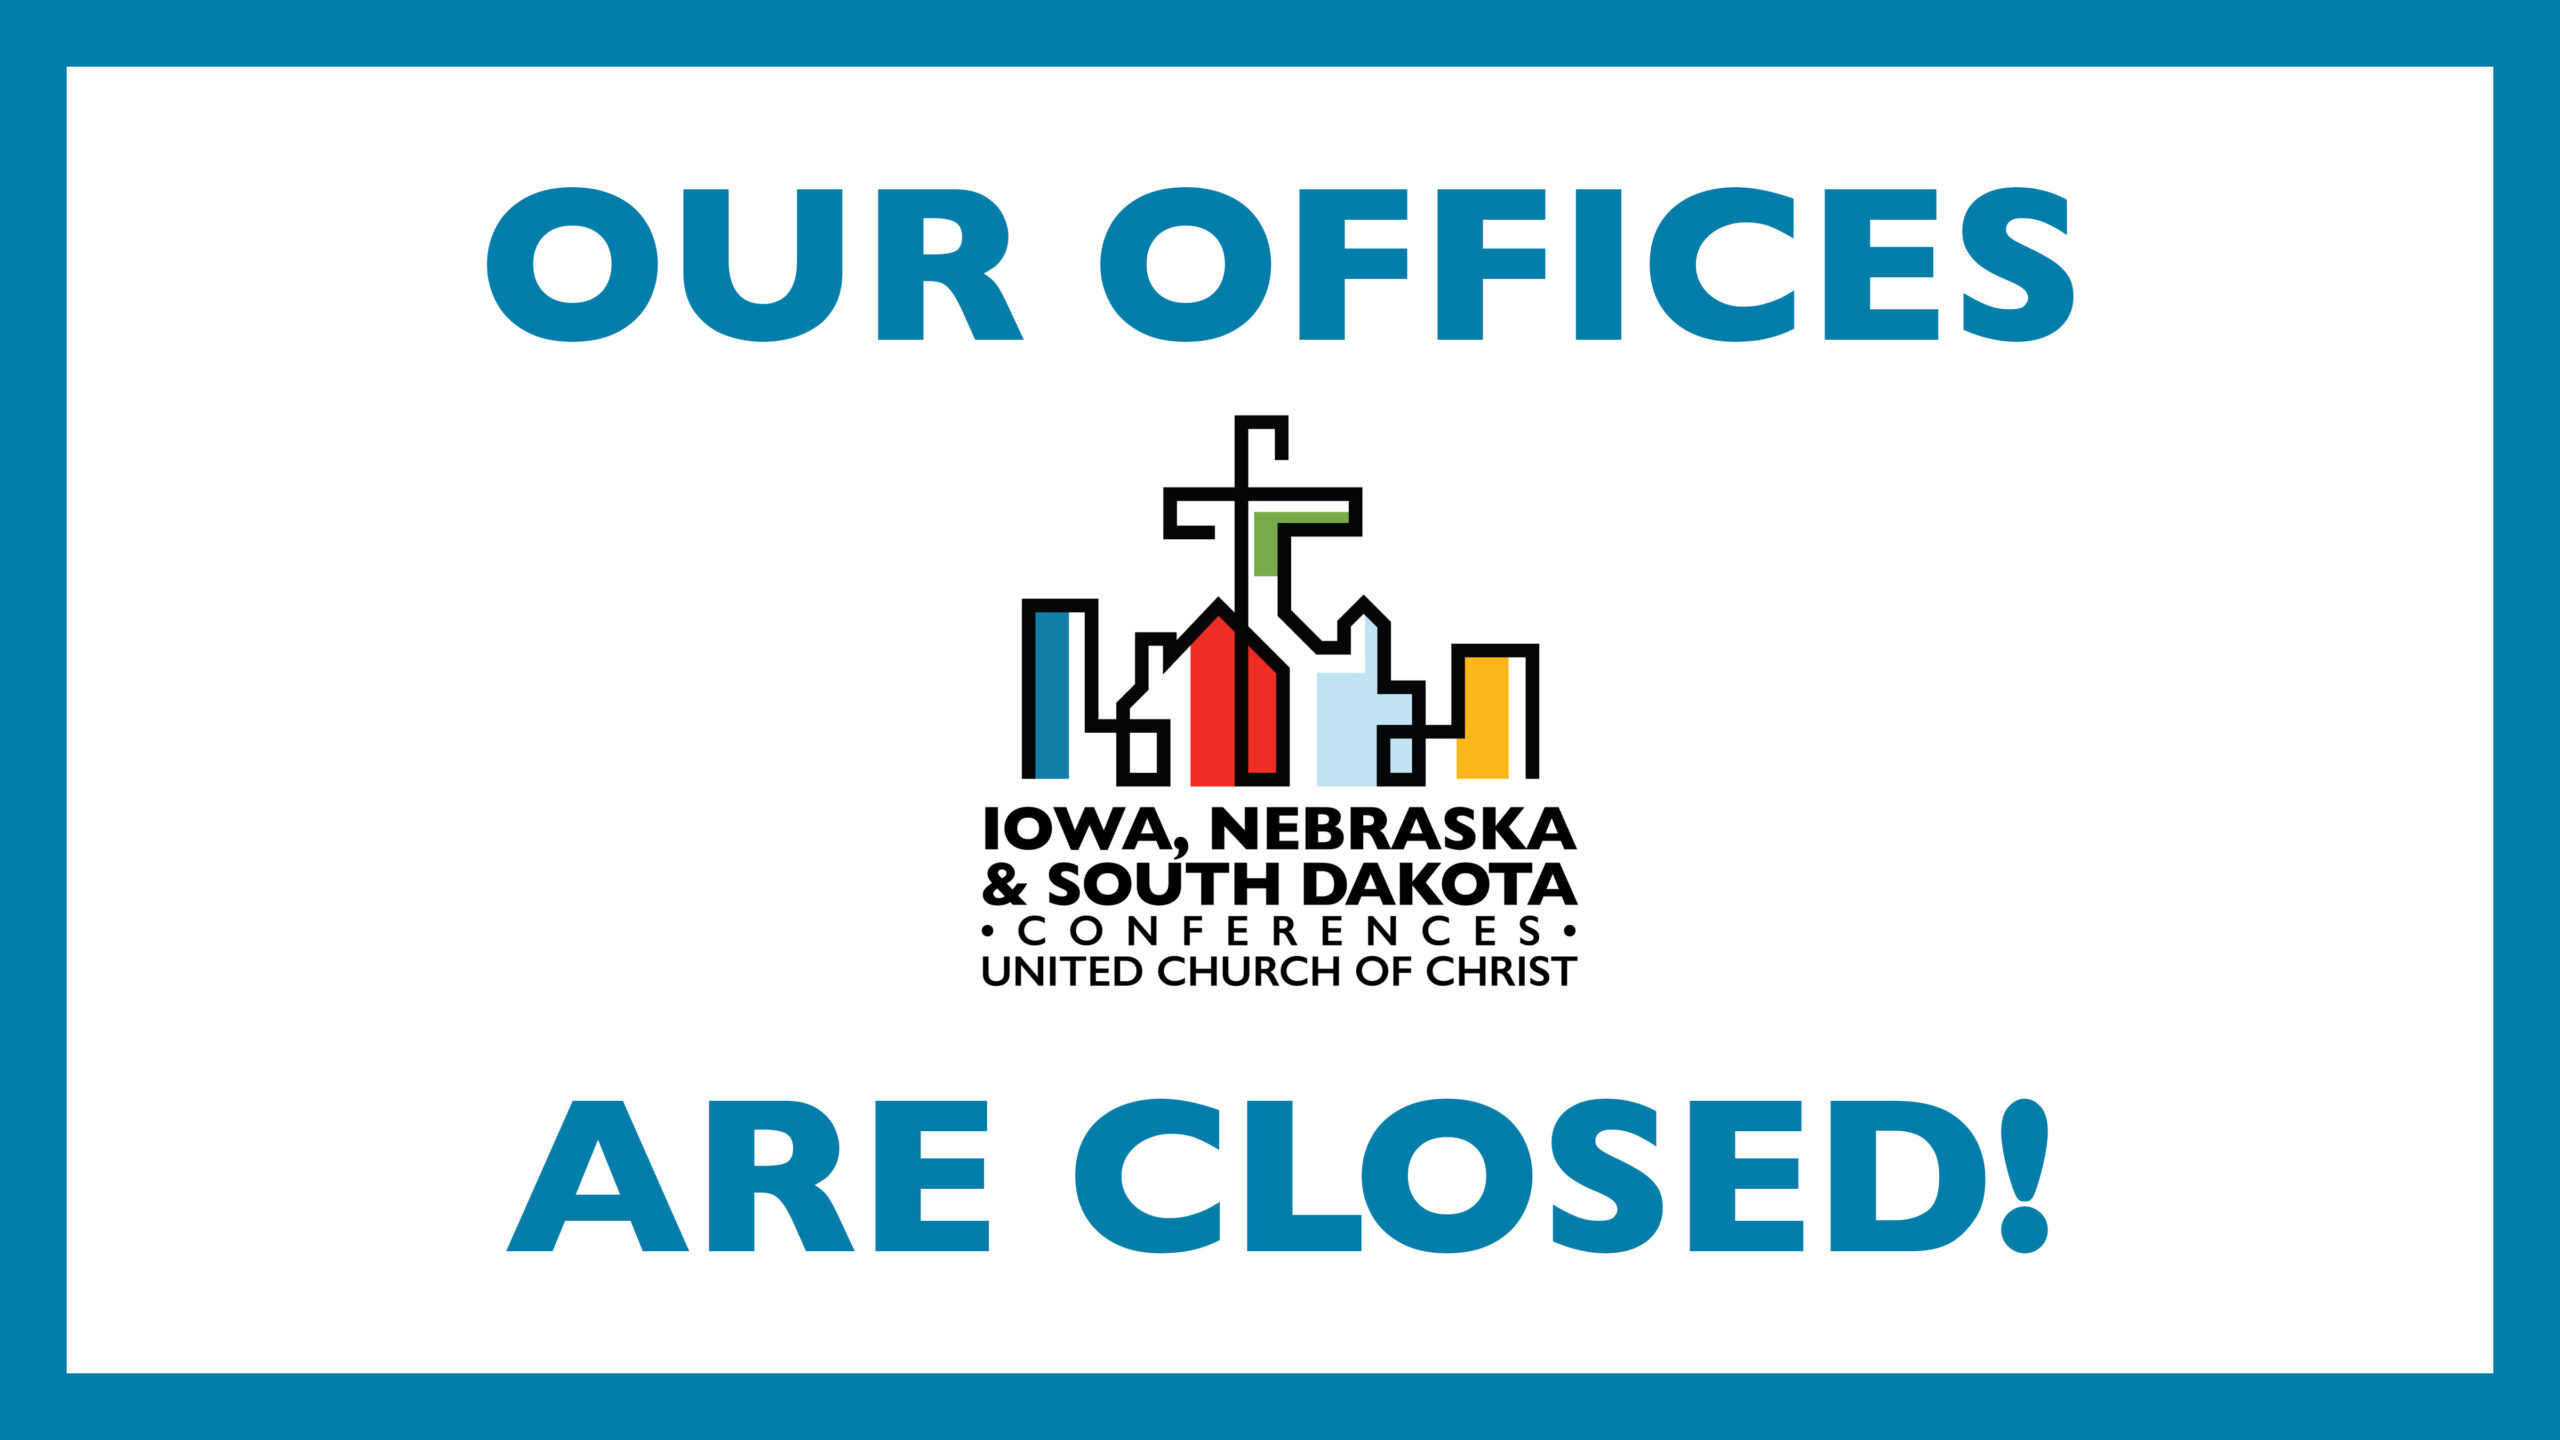 the text "our offices are closed" with the TCM logo